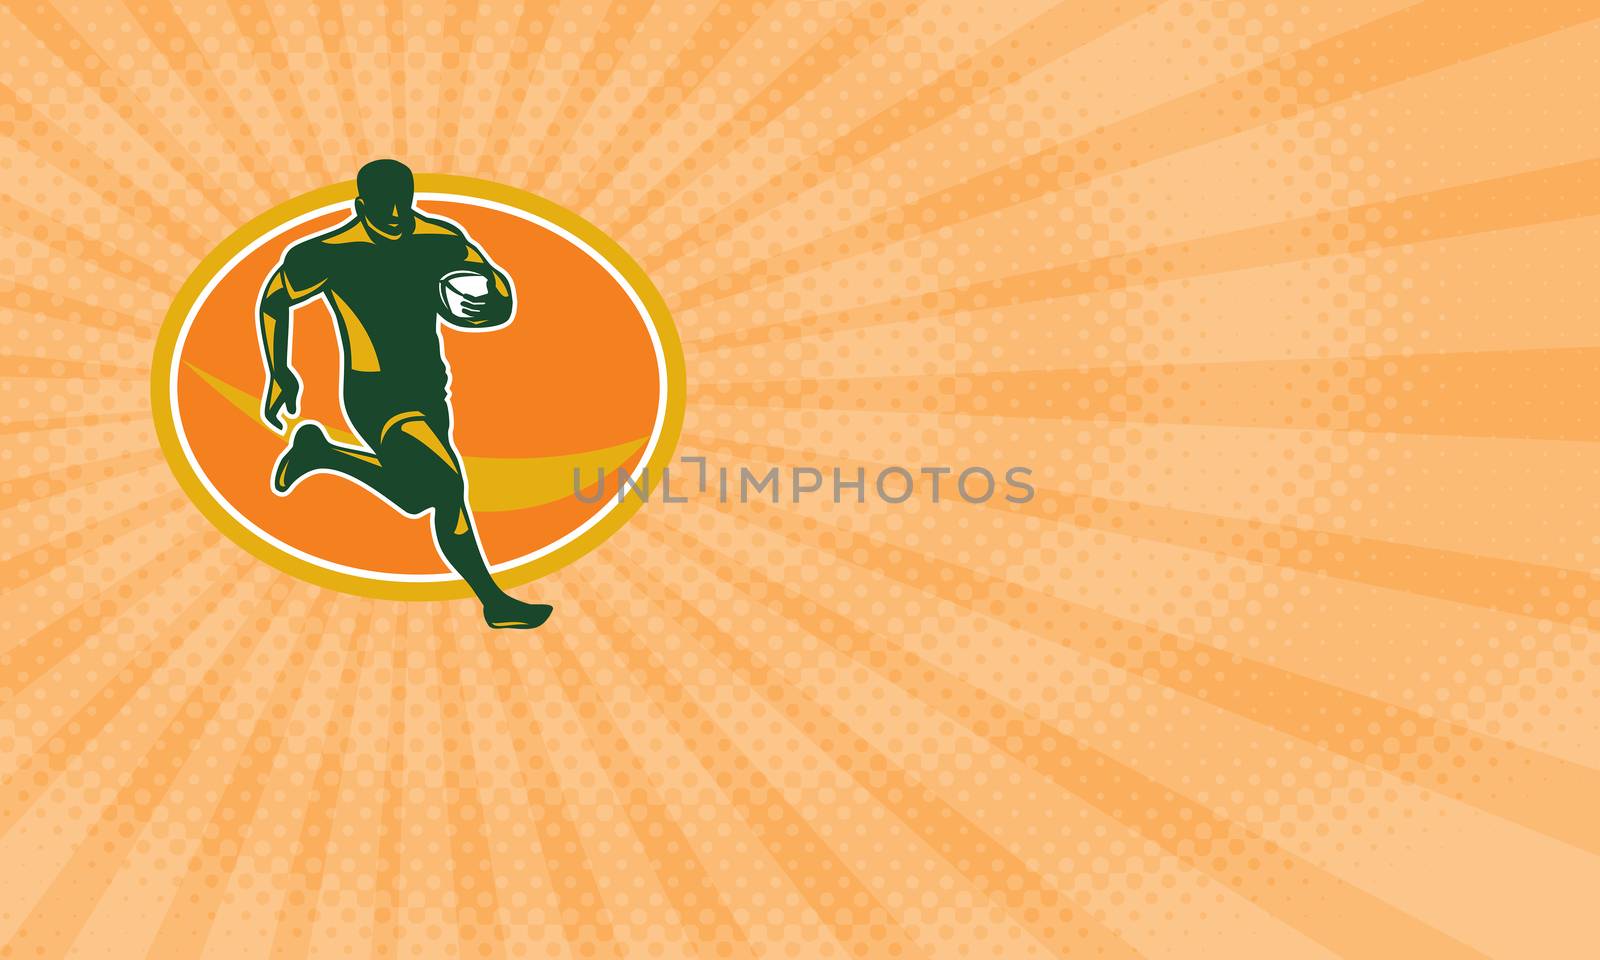 Business card showing Illustration of a rugby player running with the ball in silhouette viewed from front set inside oval shape done in retro style.



